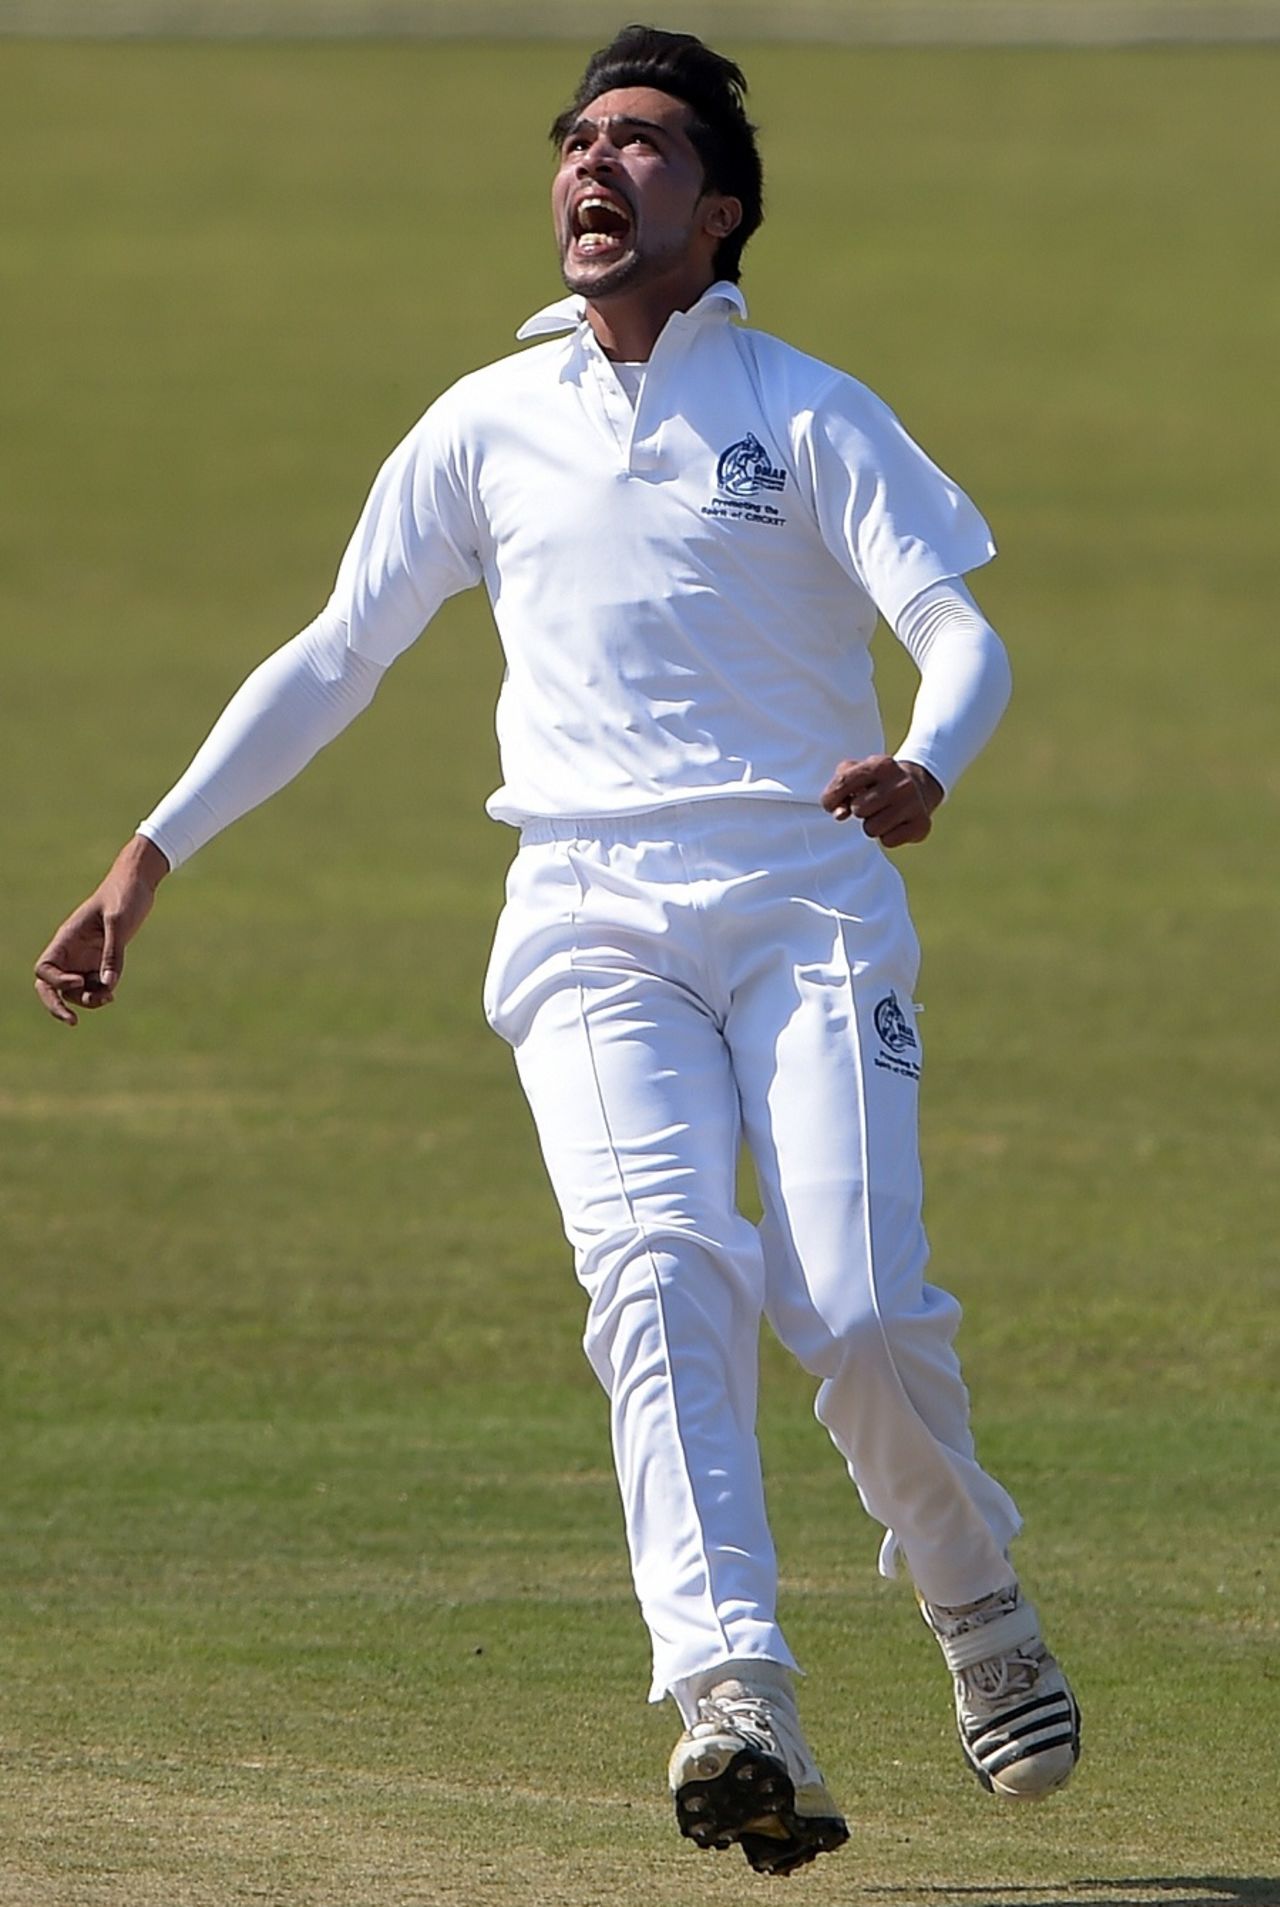 Mohammad Amir is pumped after taking a wicket after taking a wicket on his return to competitive cricket, Rawalpindi, March 13, 2015